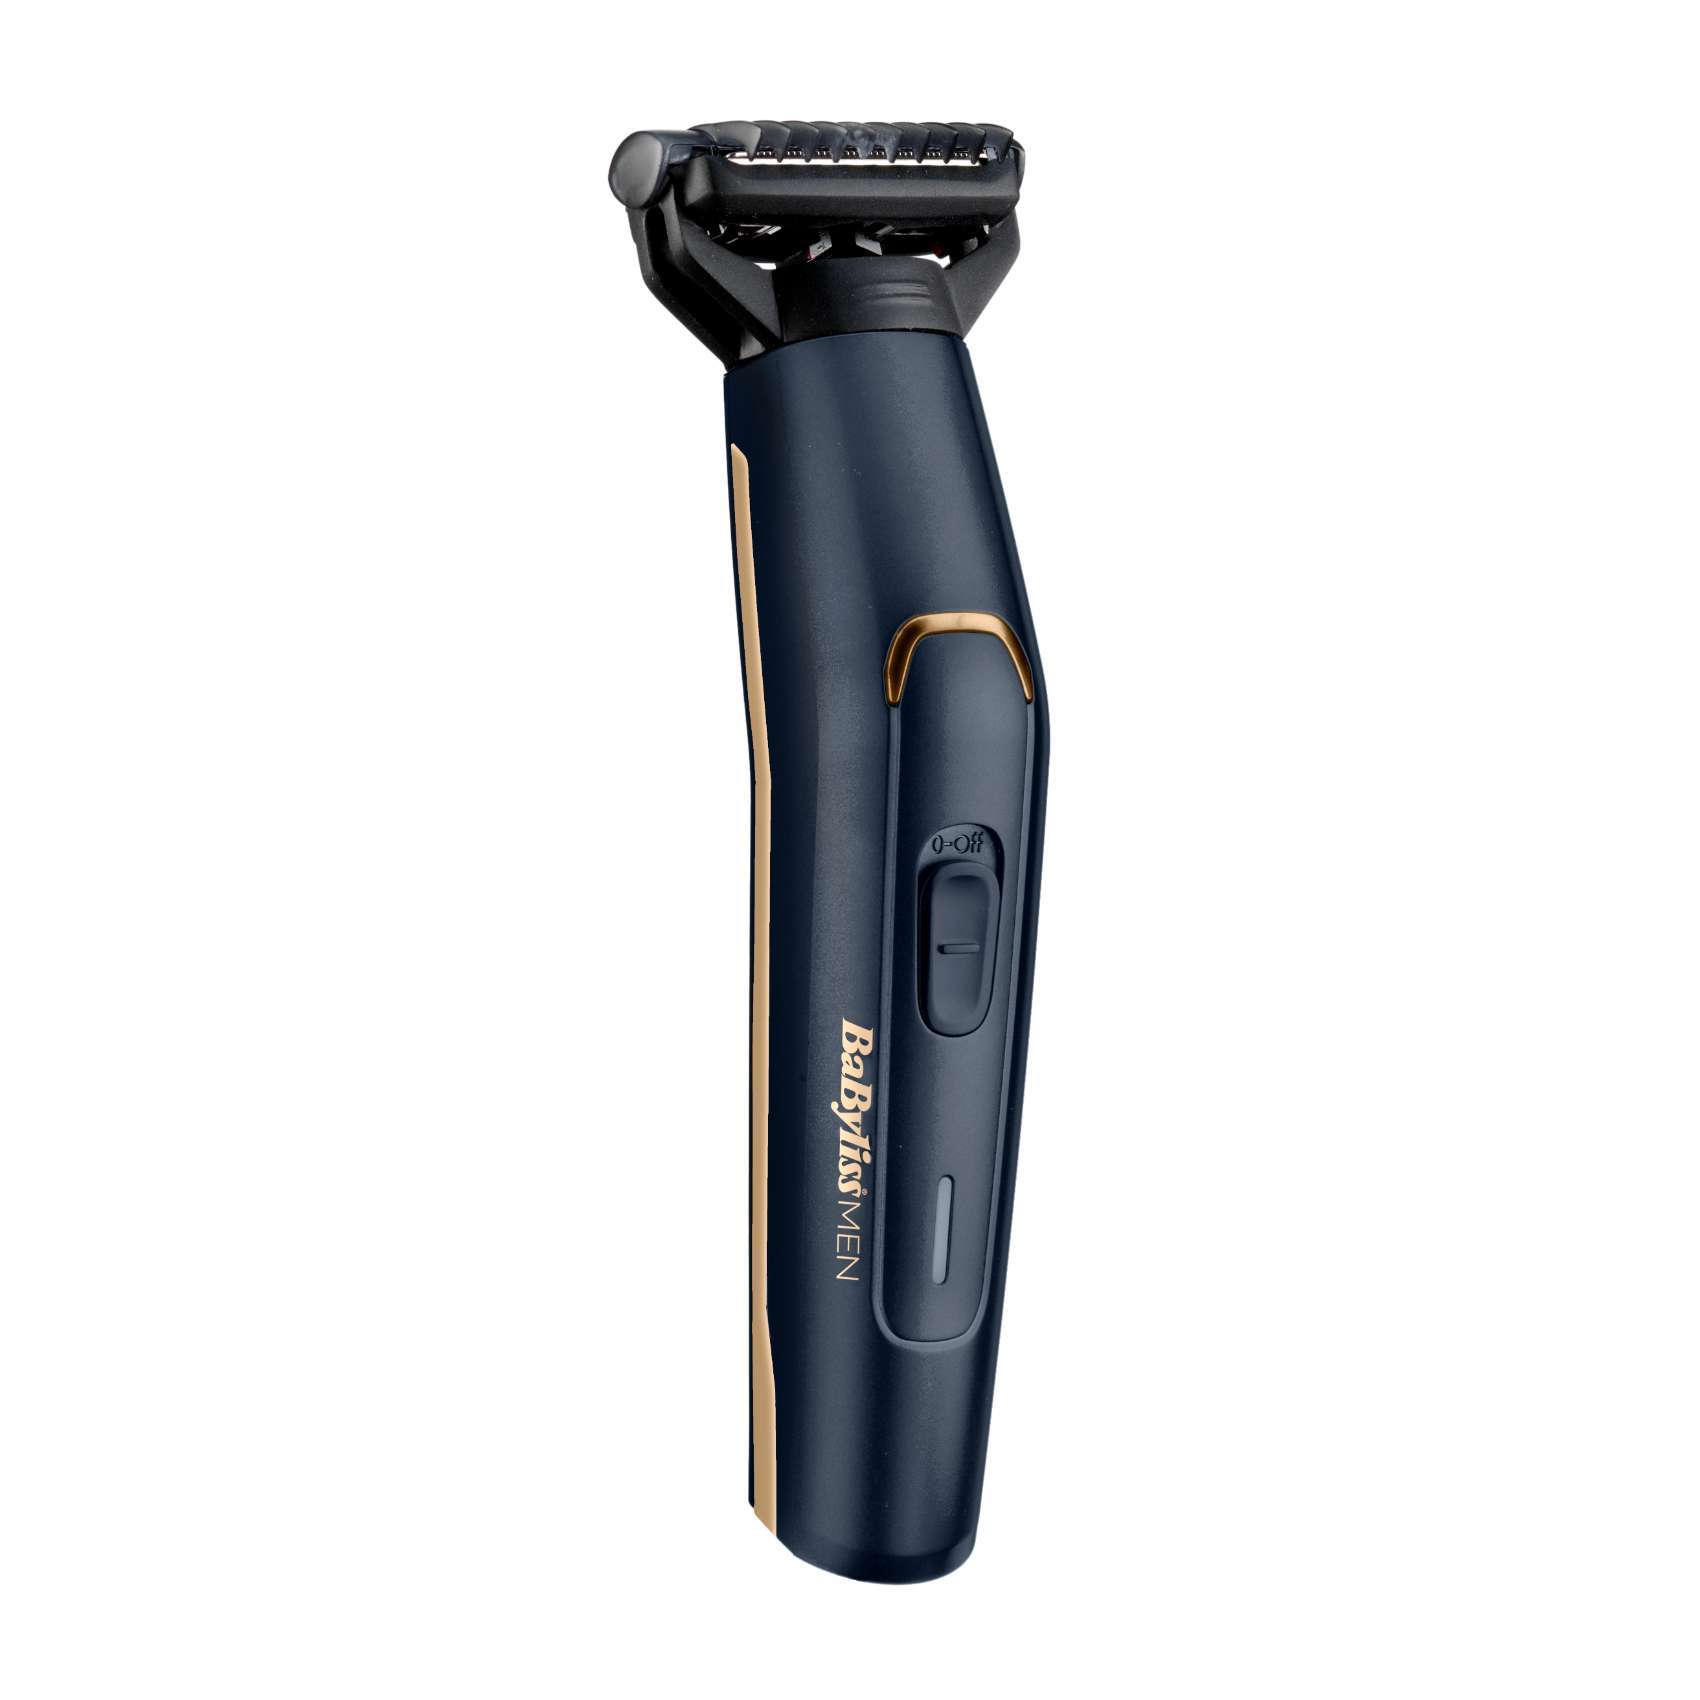 philips trimmer qg3030 accessories